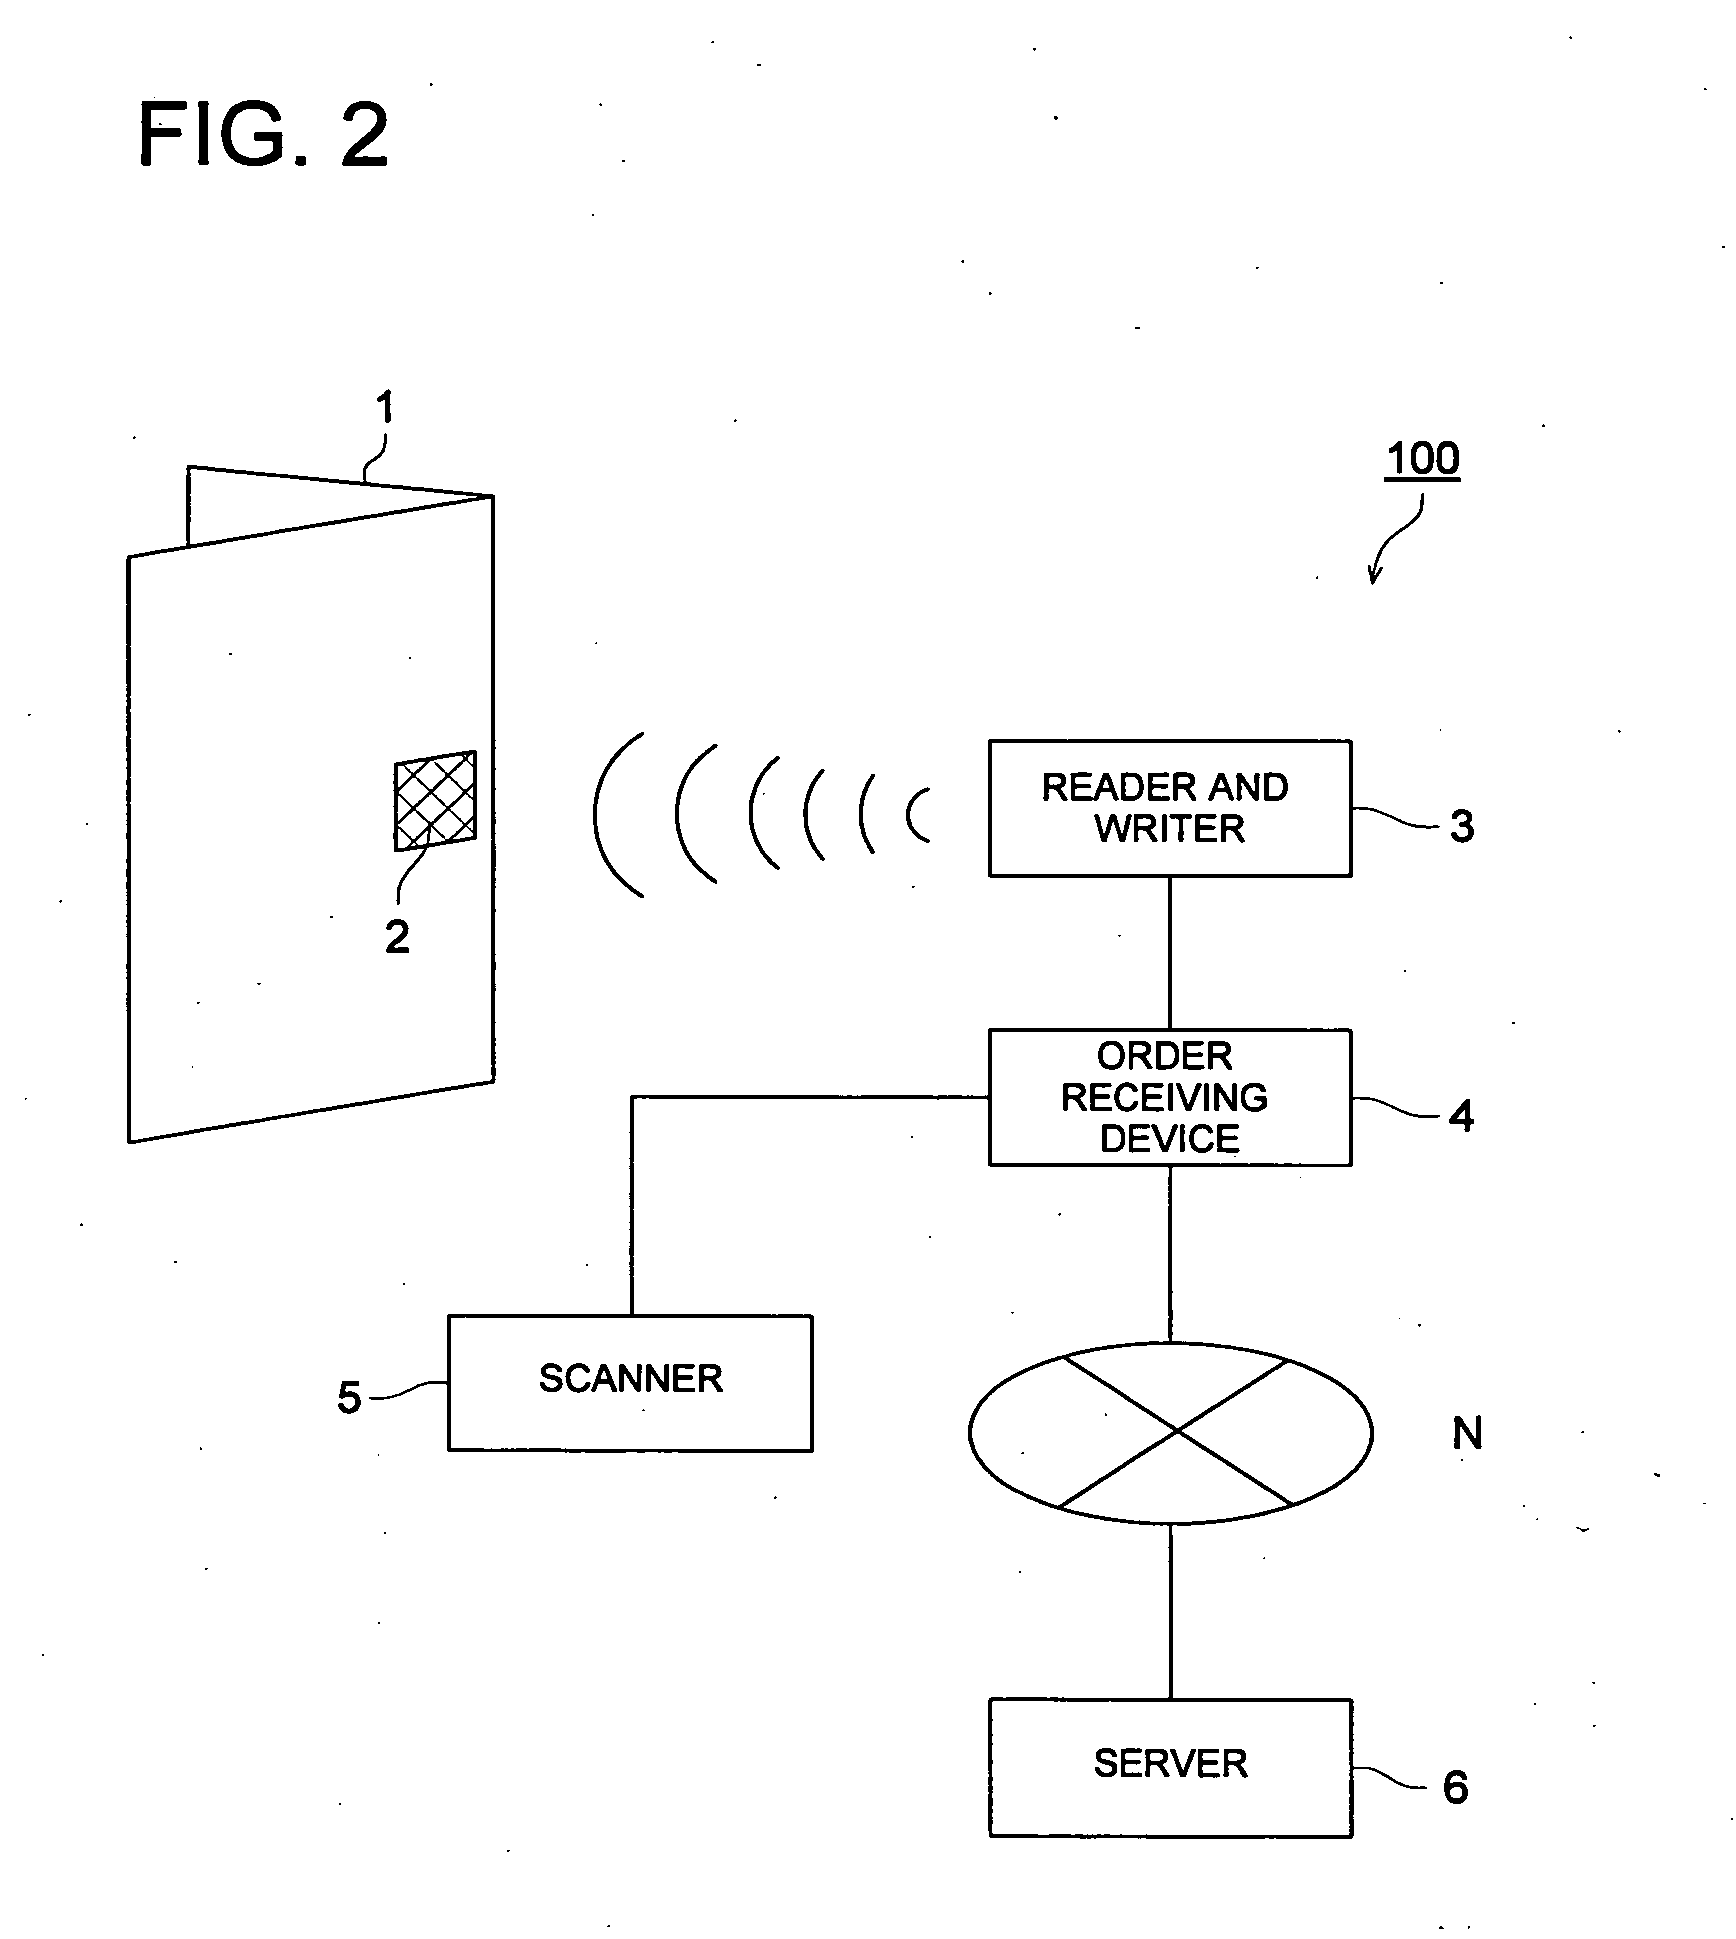 Print order sheet, information recording device, and print system